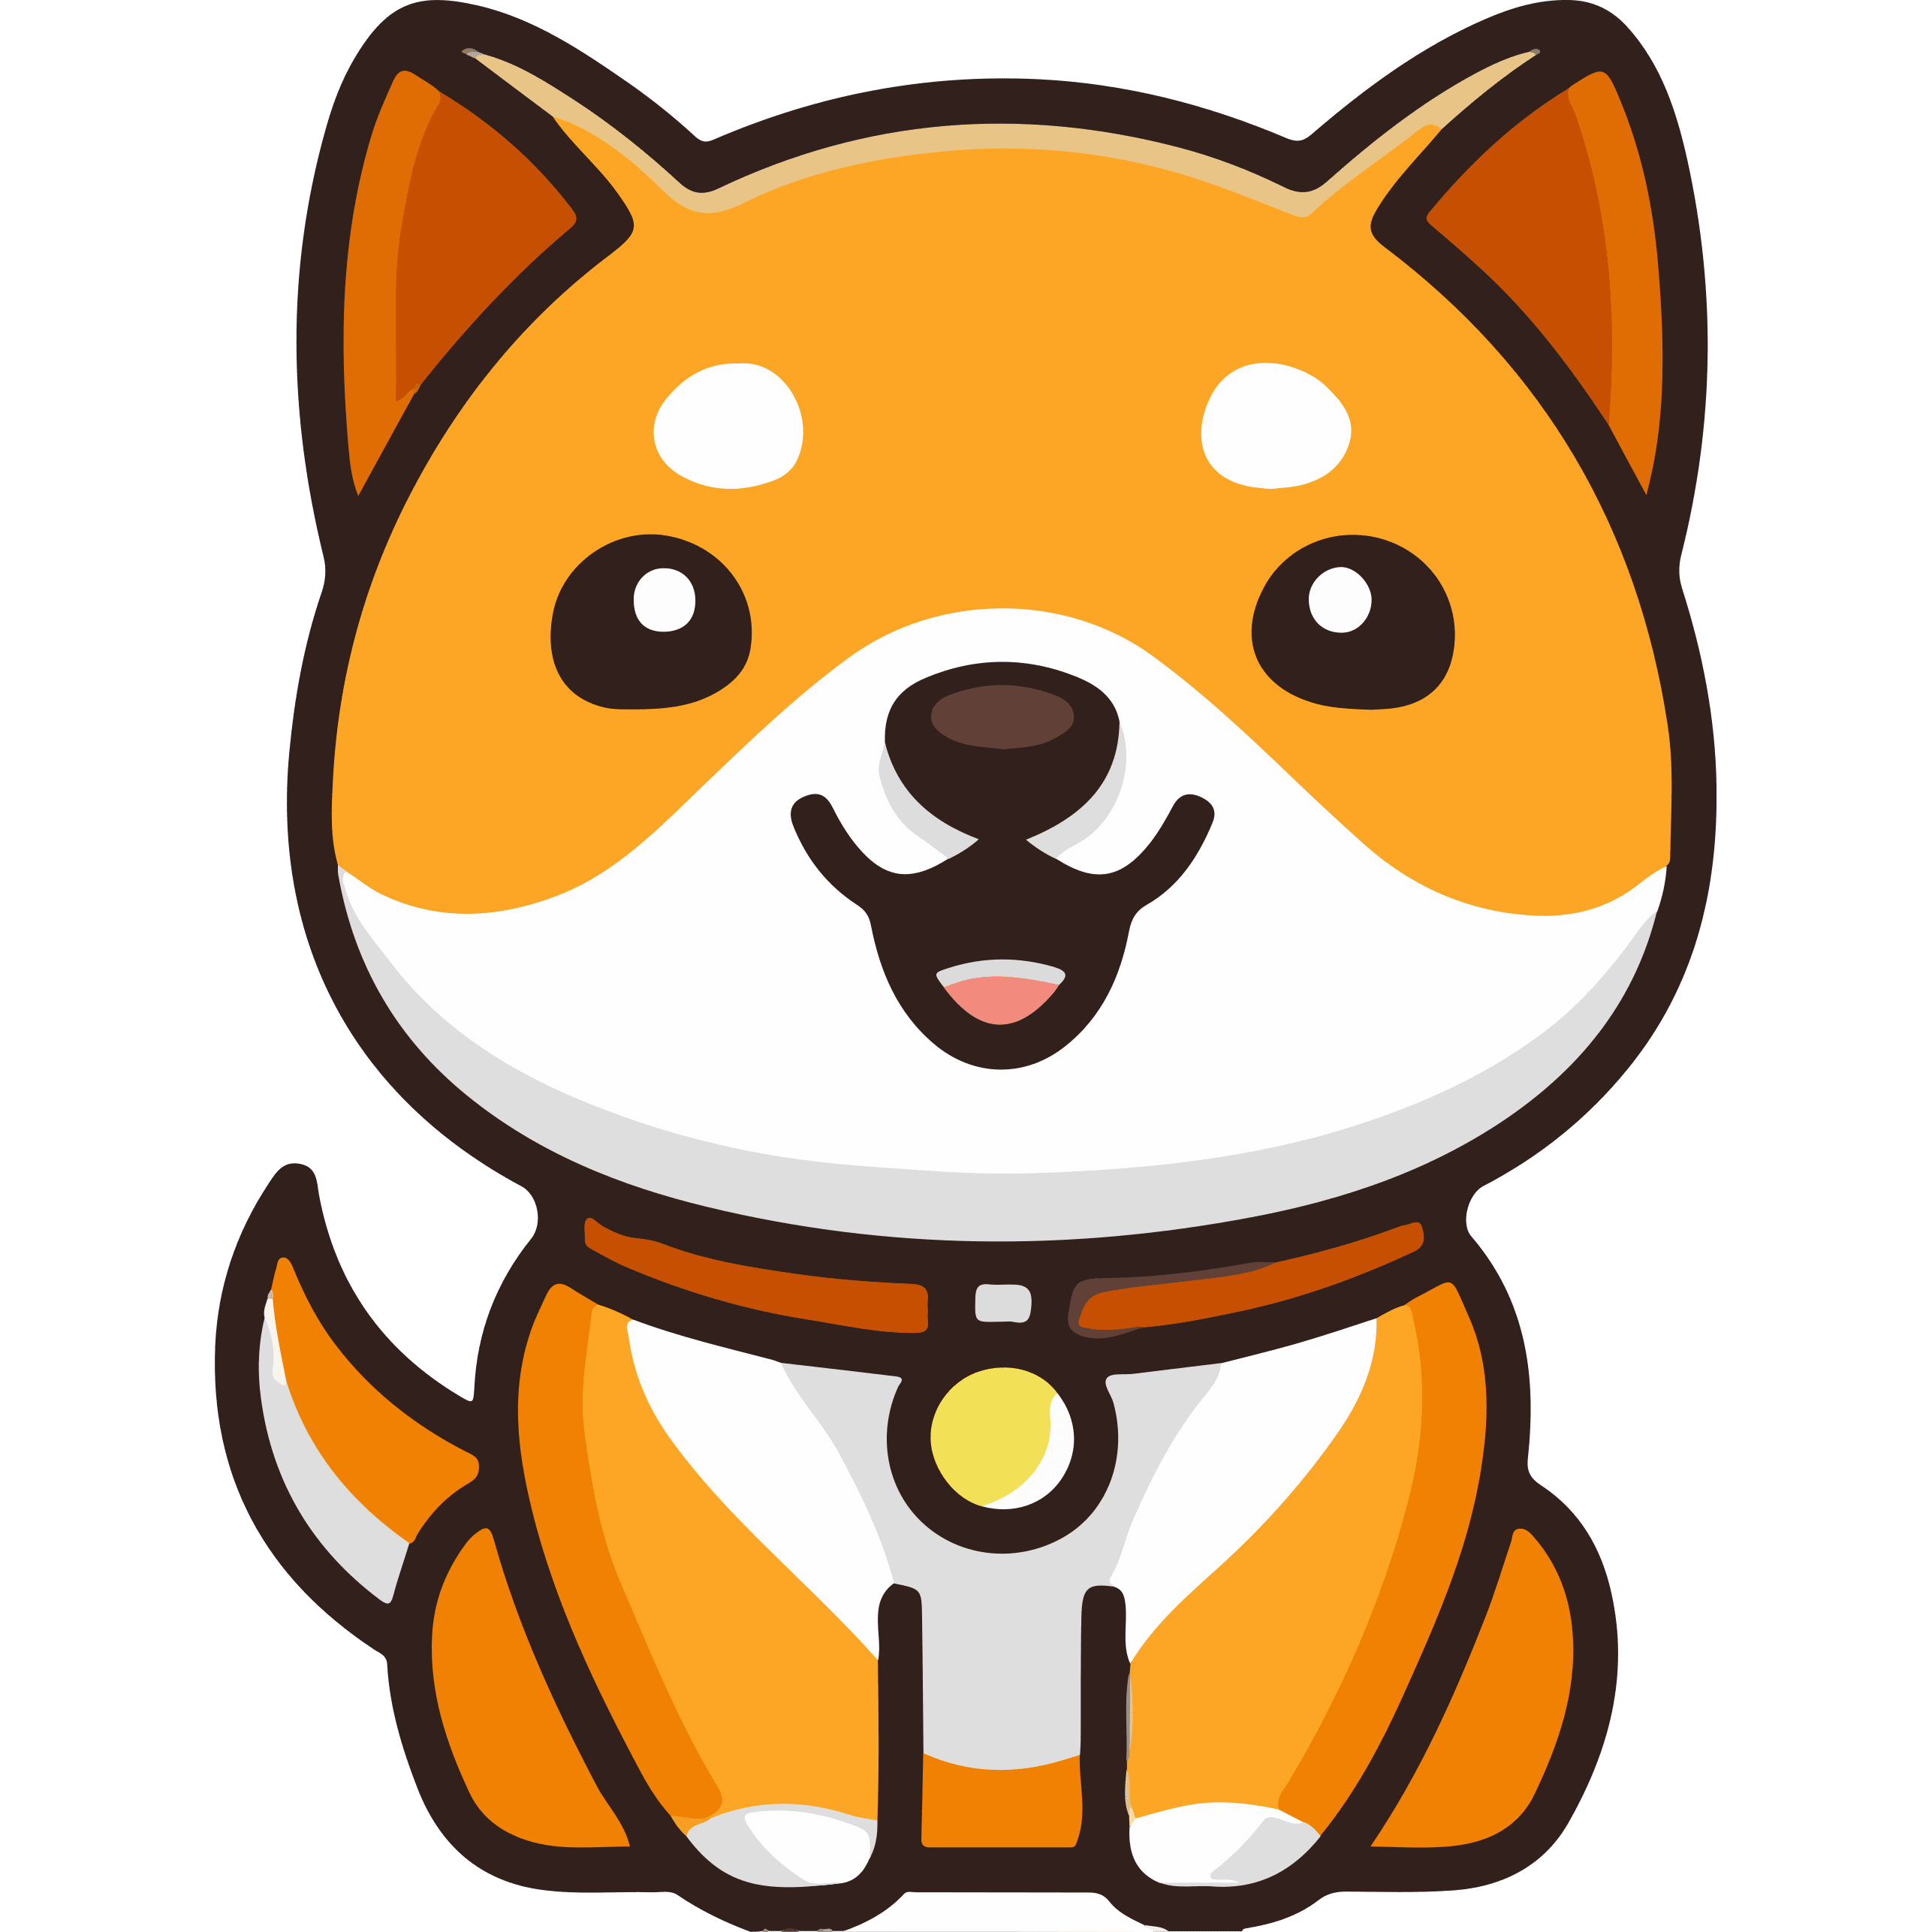 Baby Doge Coin logo in png format